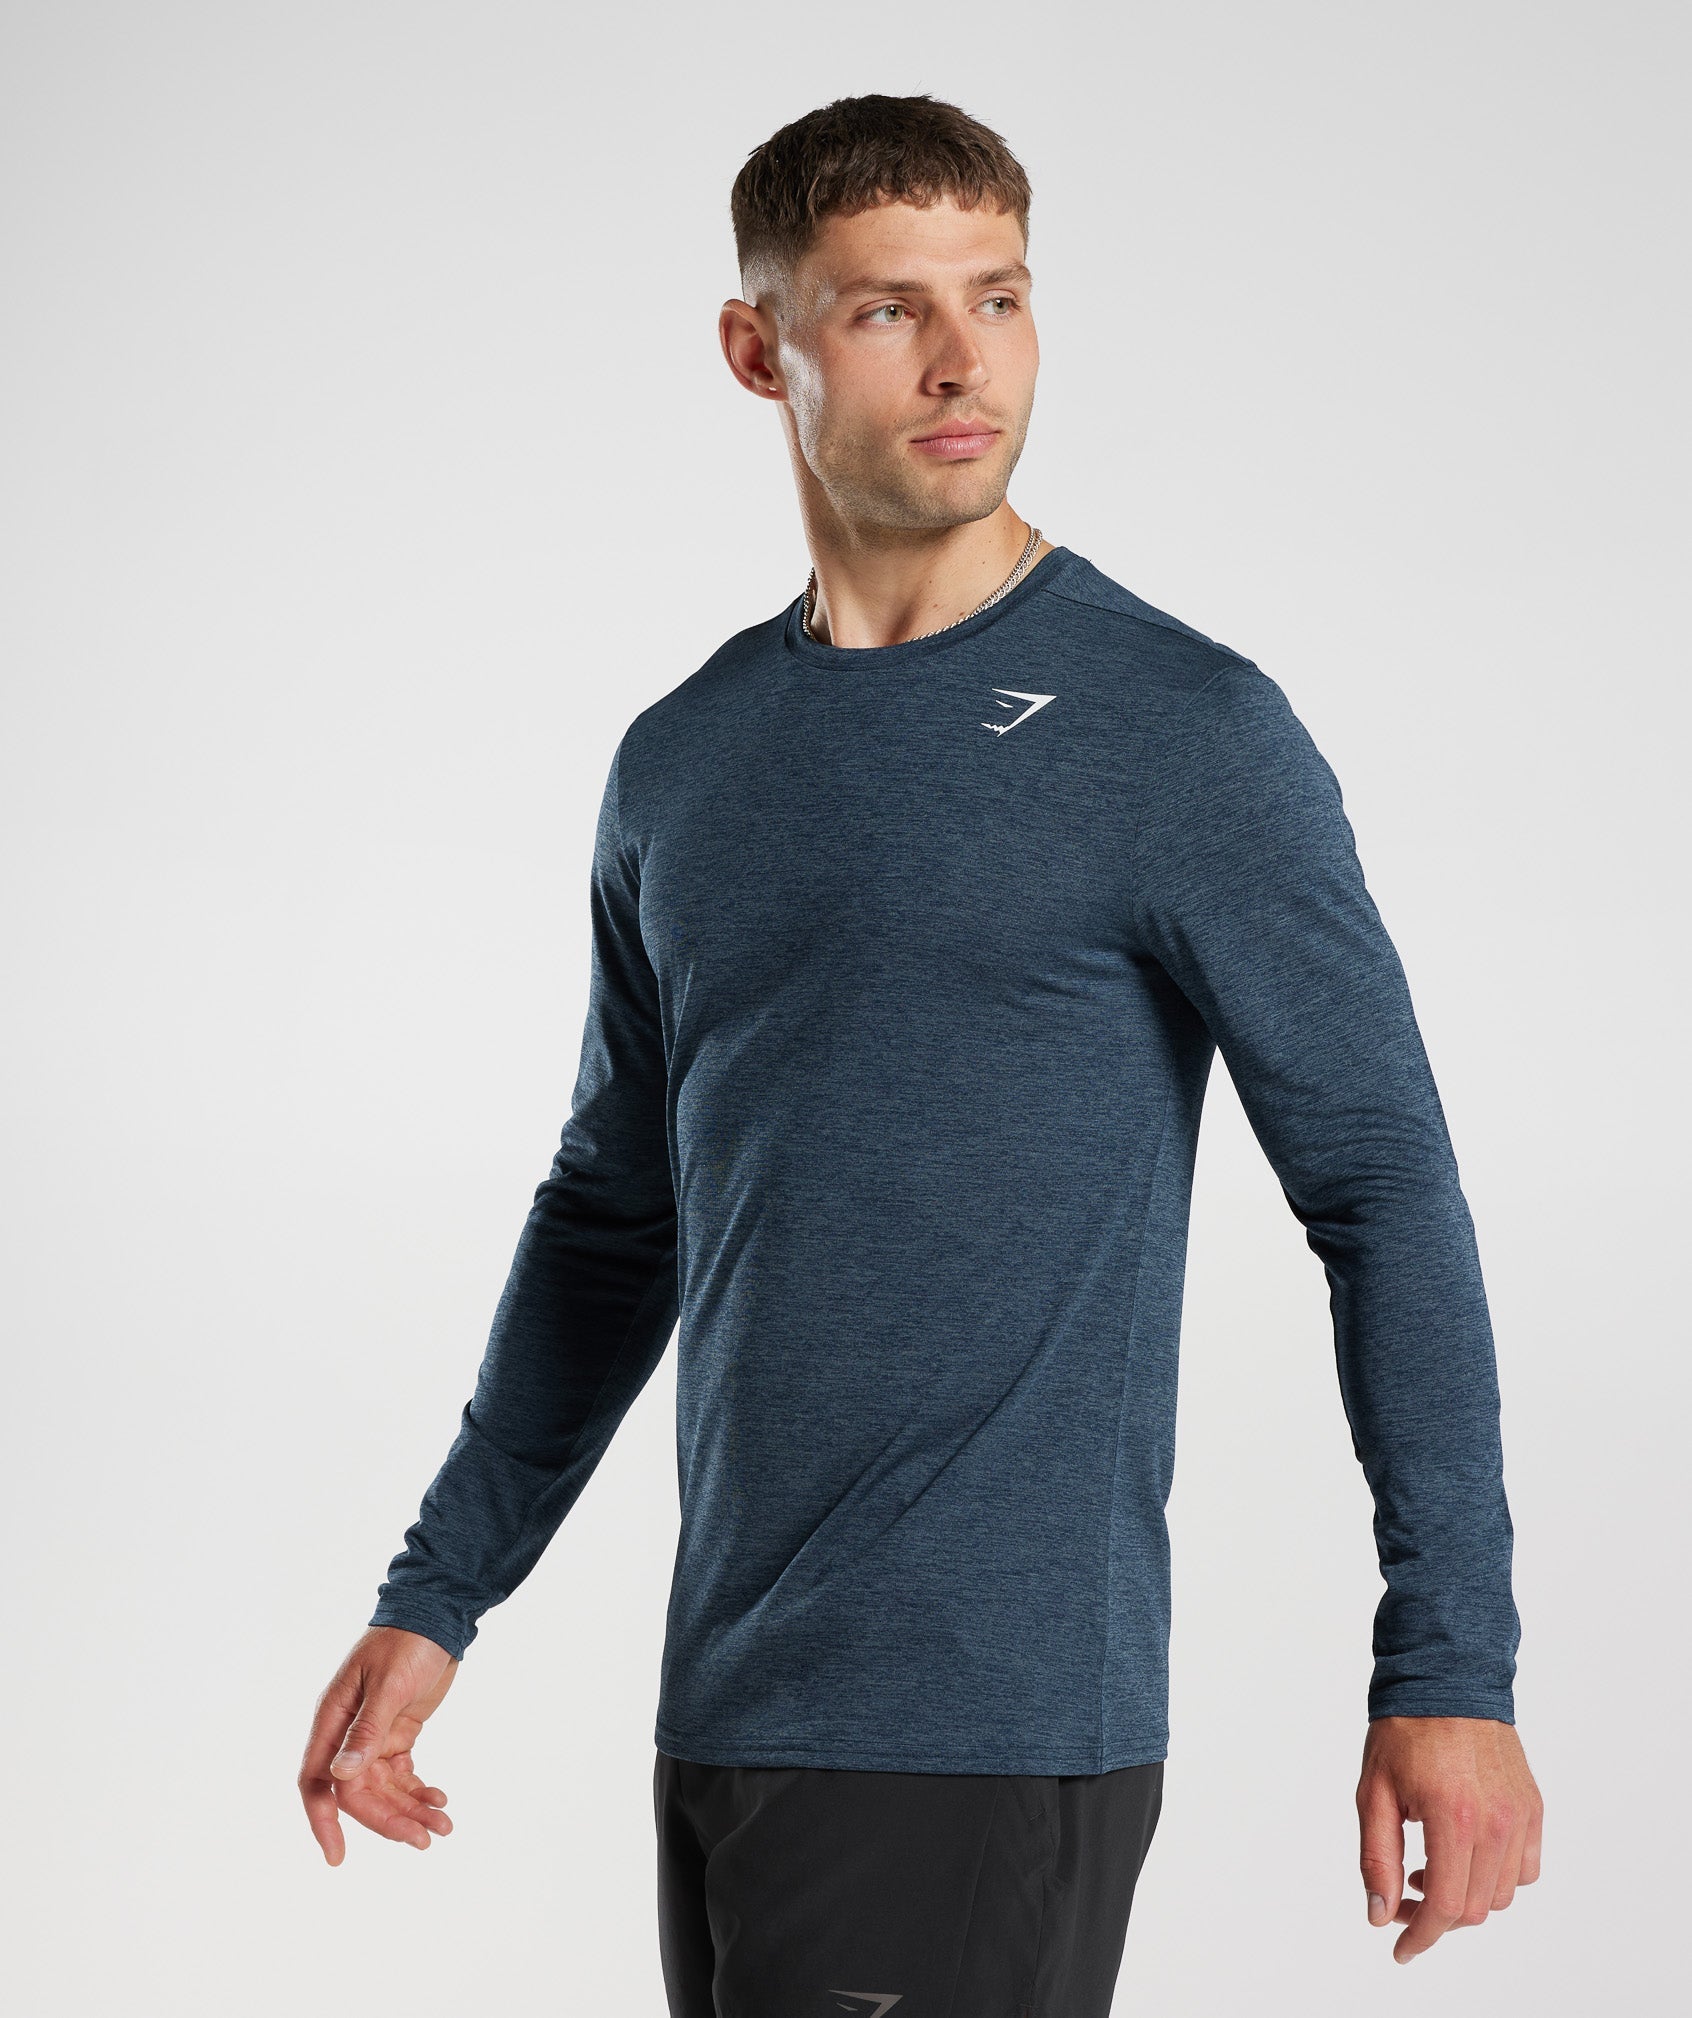 Arrival Marl Long Sleeve T-Shirt in Navy/Smokey Teal Marl - view 3